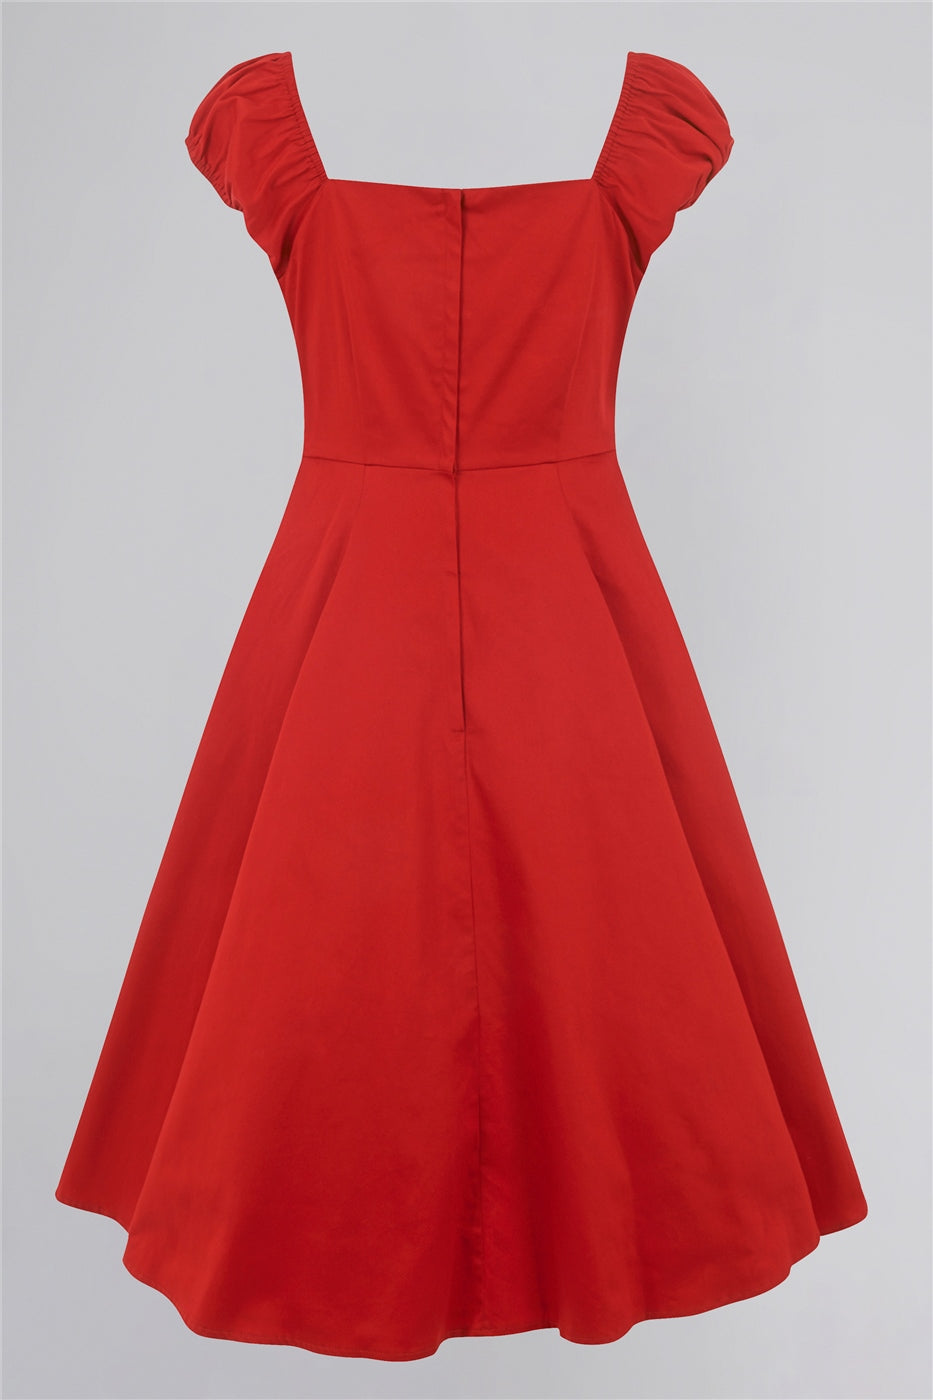 The back of the red dolores dress